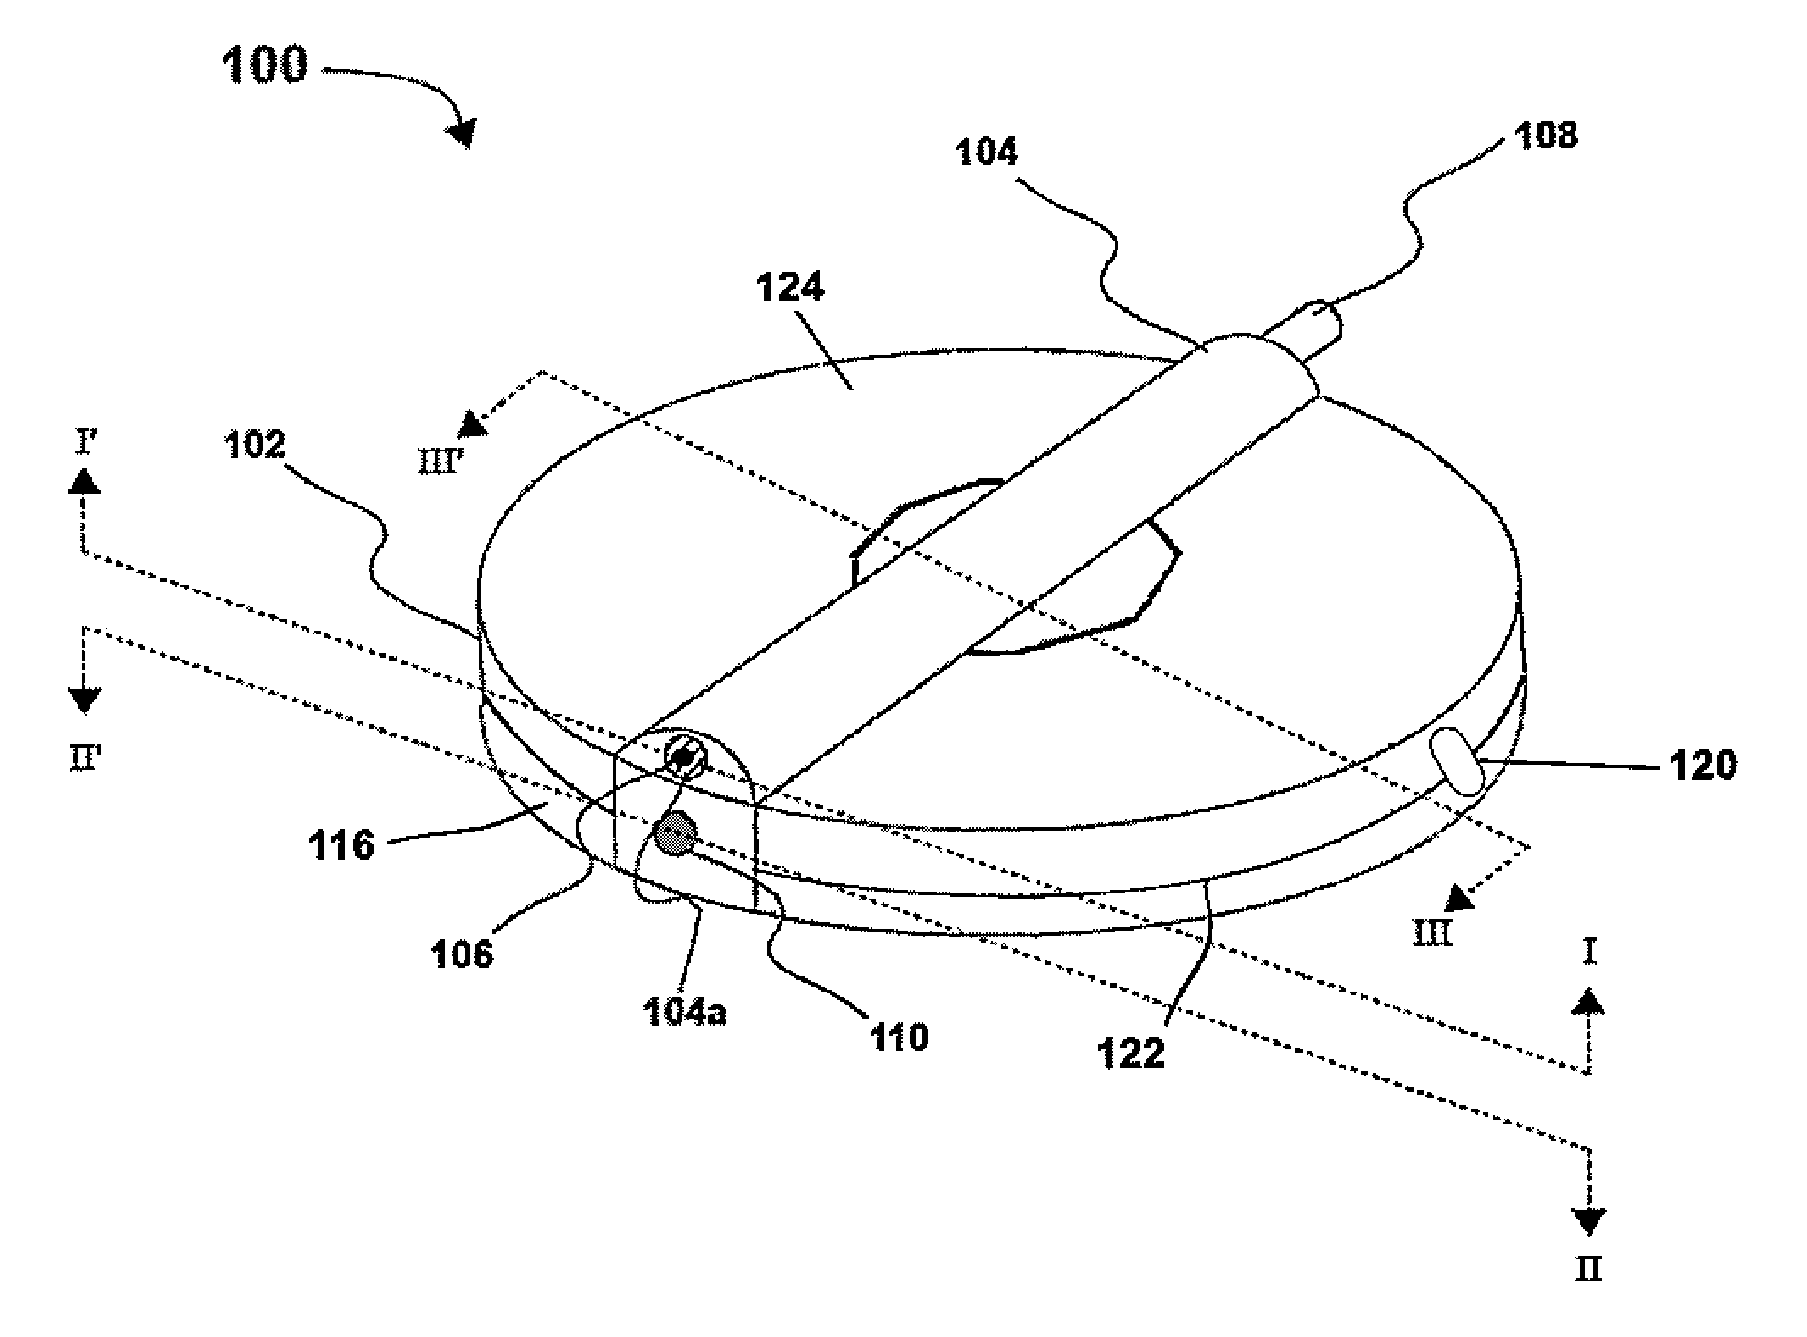 Biological fluid sampling and storage apparatus for remote use